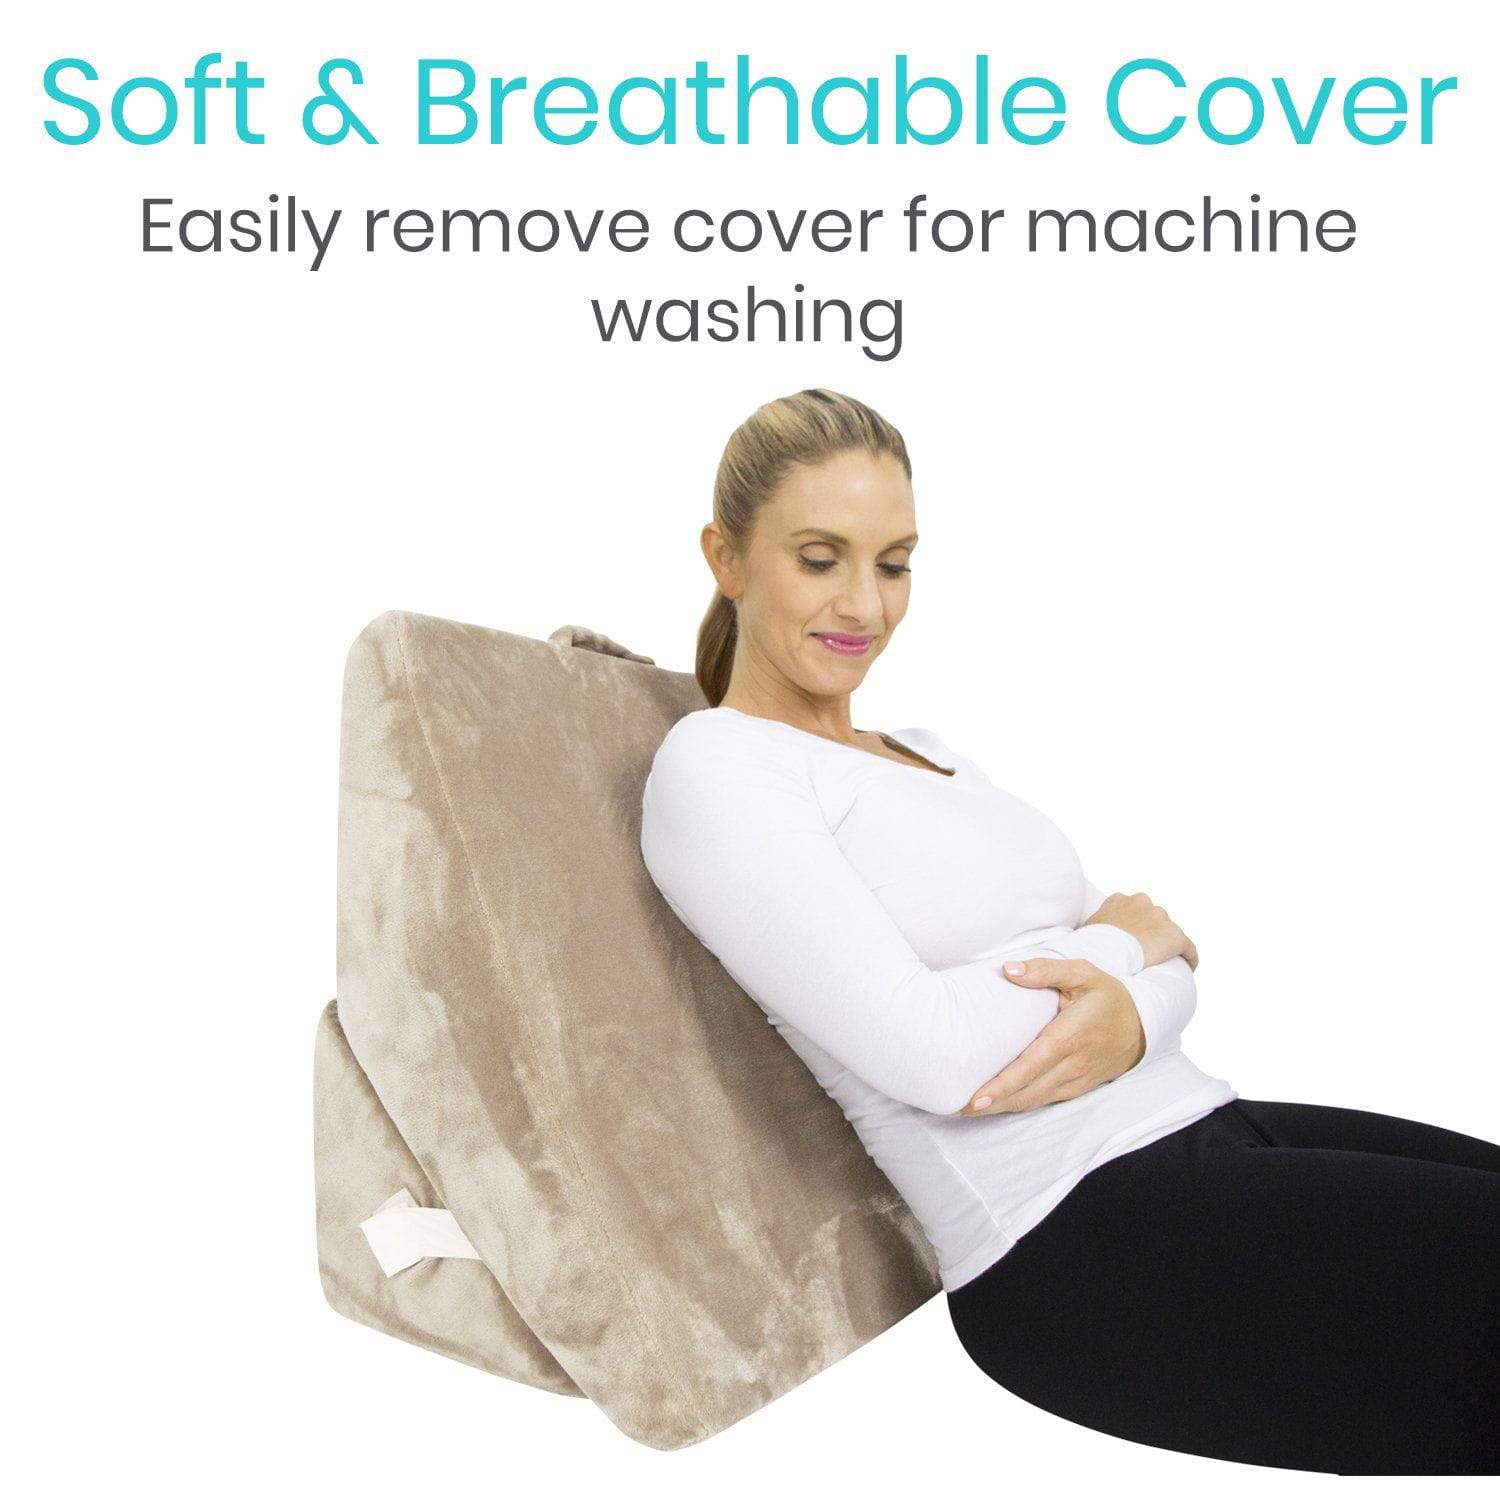 4 in 1 Bed Wedge for Better Breathing and Elevation used as back support, can be machine washed from AskSAMIE